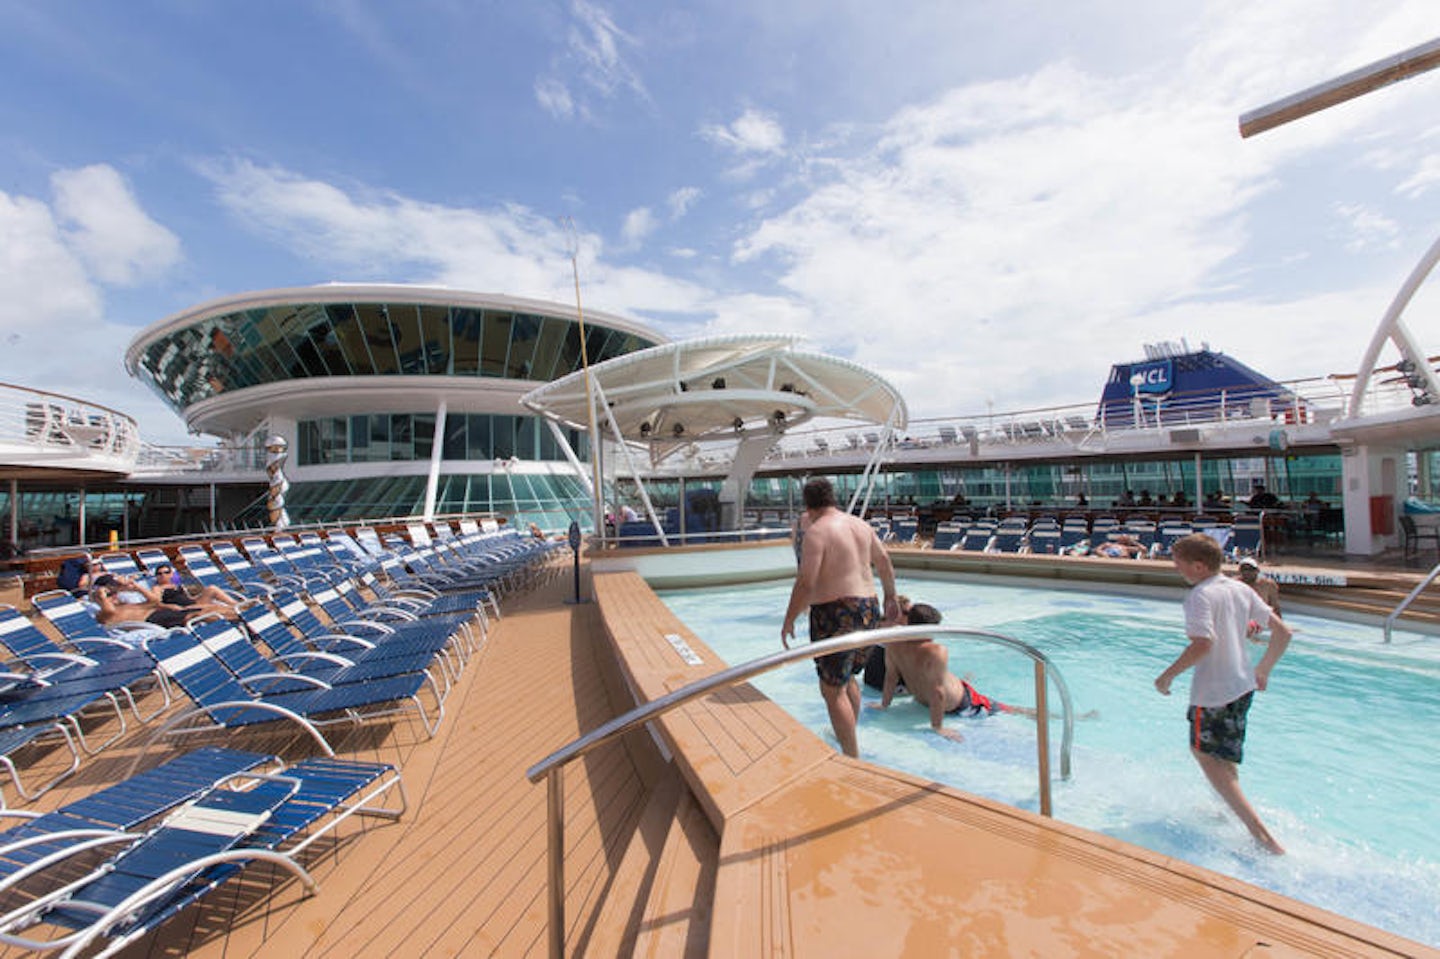 The Sports Pool on Enchantment of the Seas